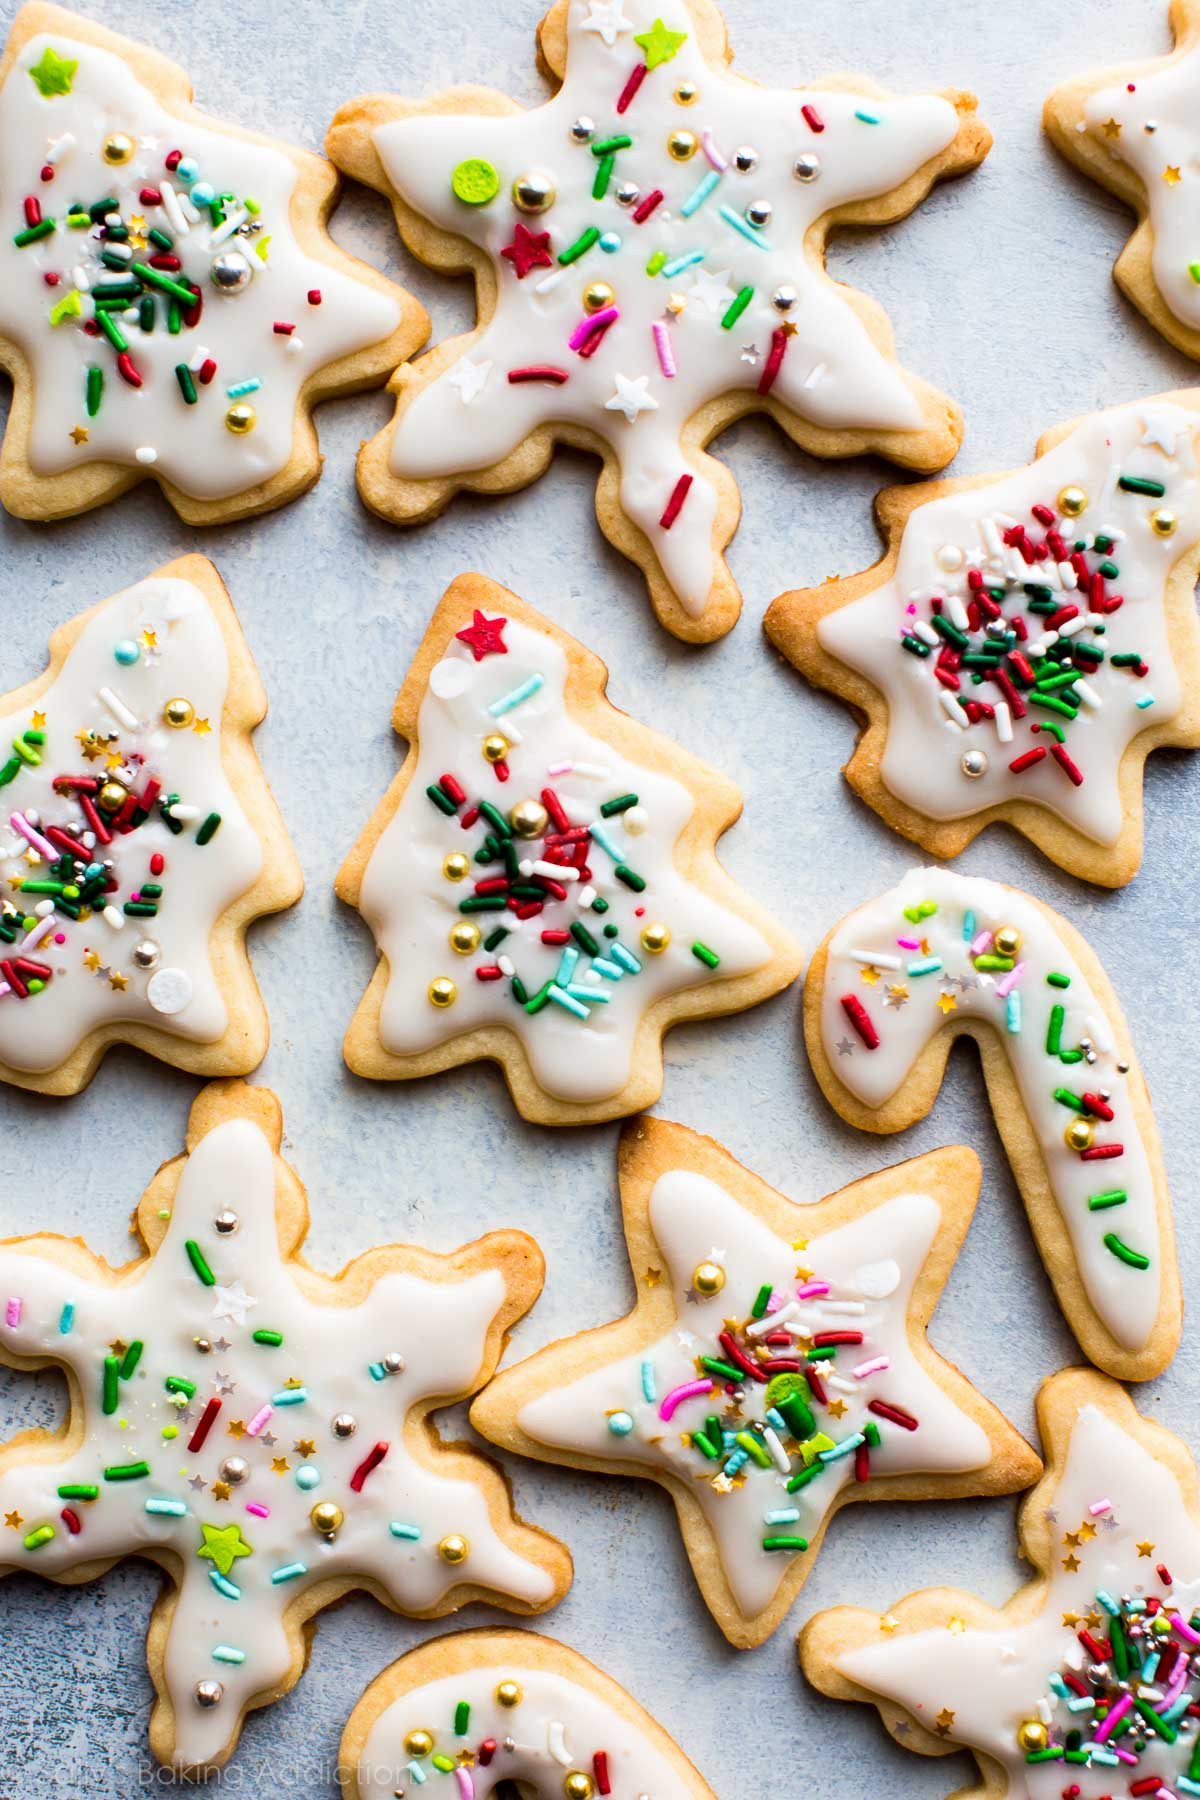 Christmas Cookies Image
 Holiday Cut Out Sugar Cookies with Easy Icing Sallys